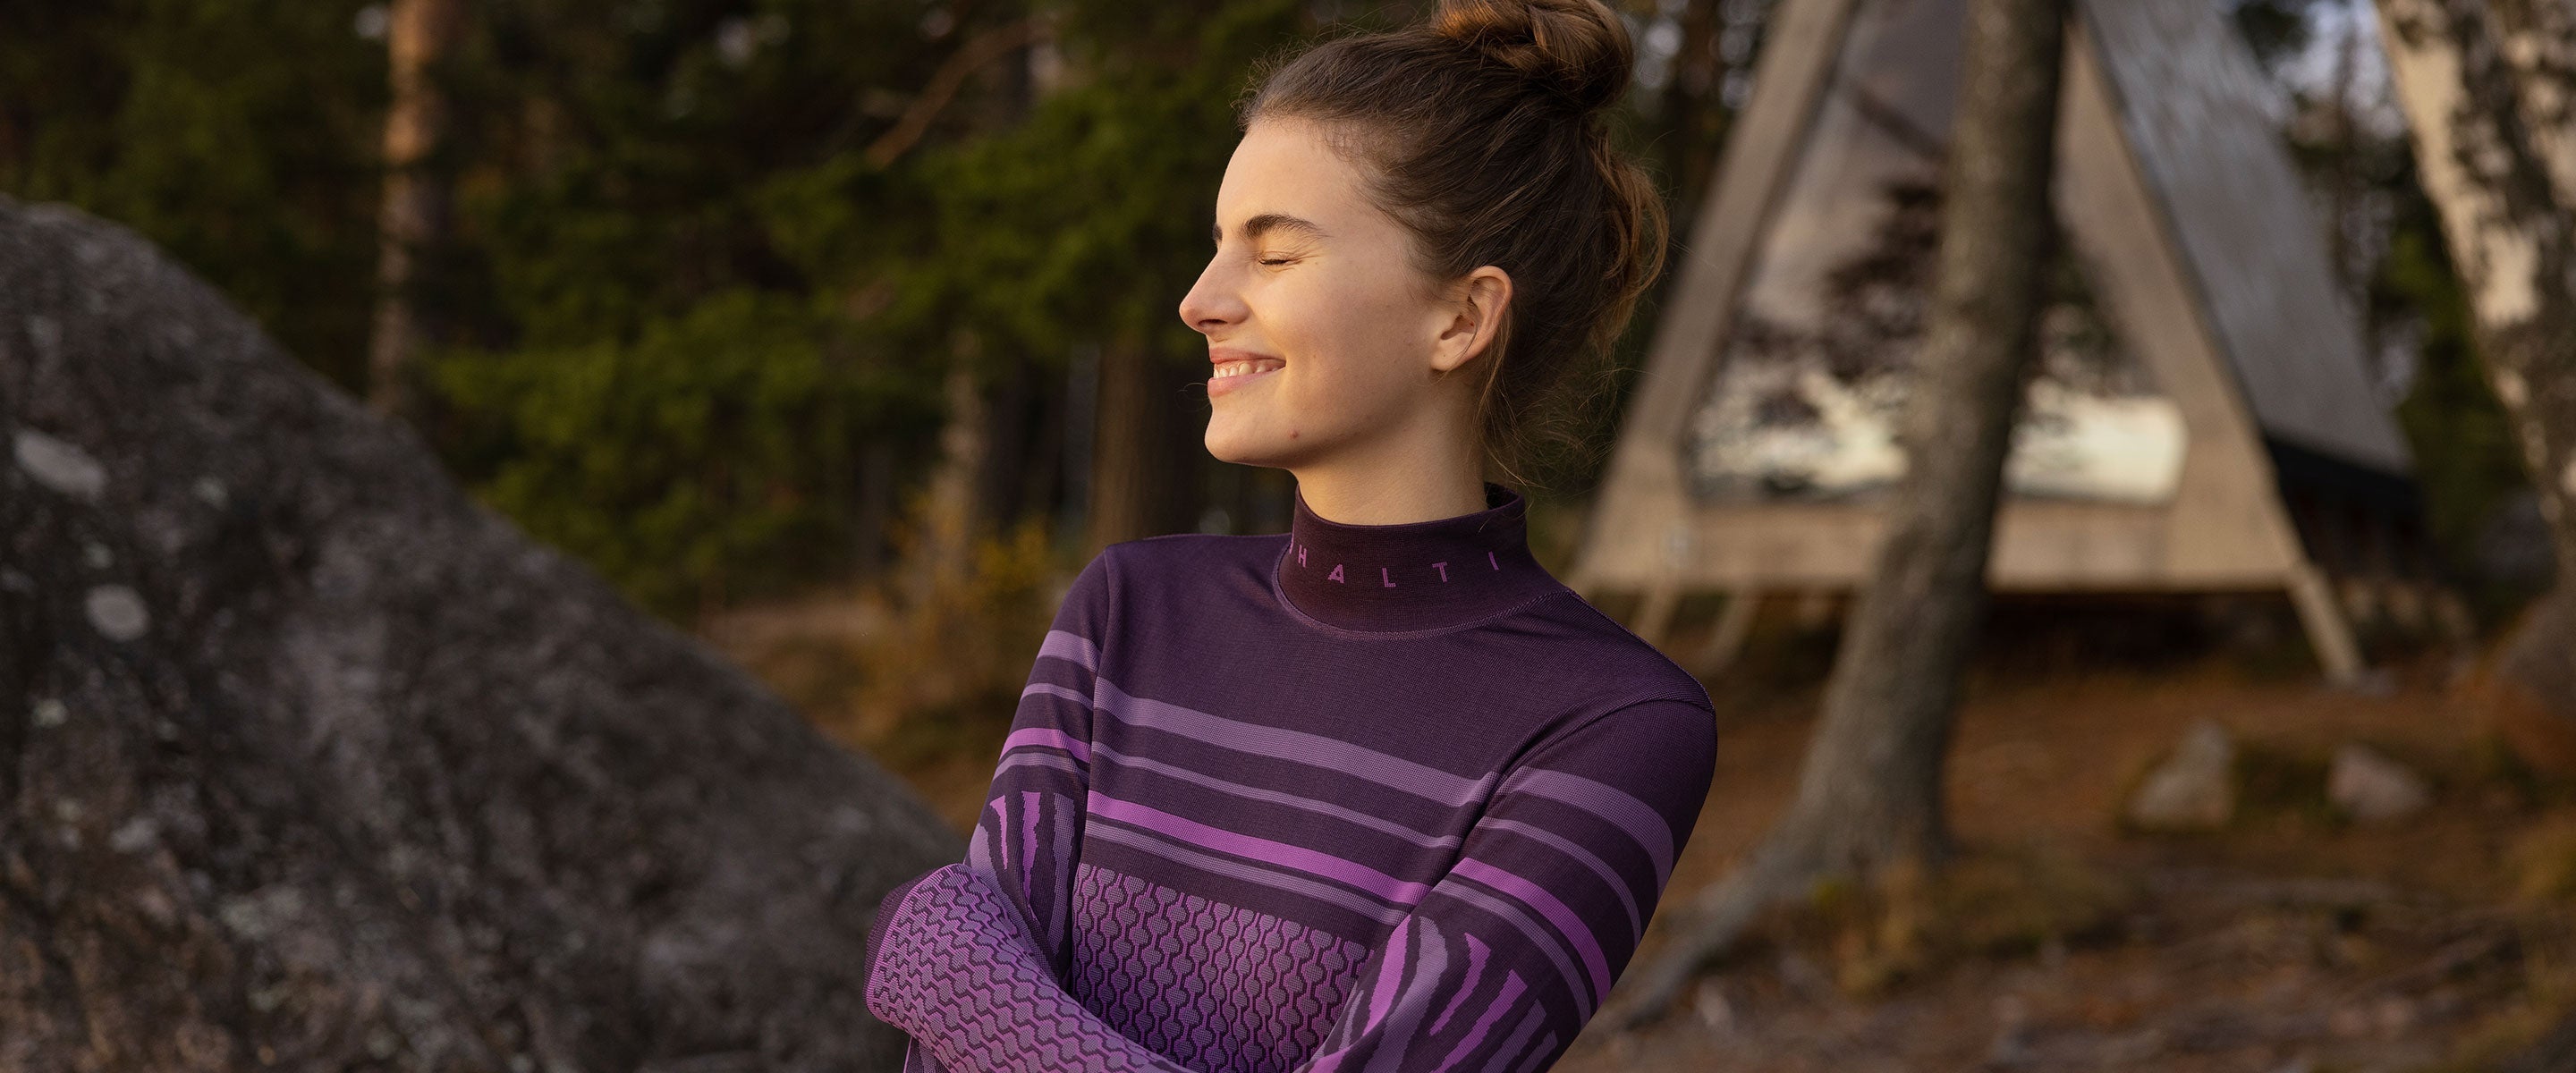 Womens Base Layers, Breathable Technical Tops, T-shirts and